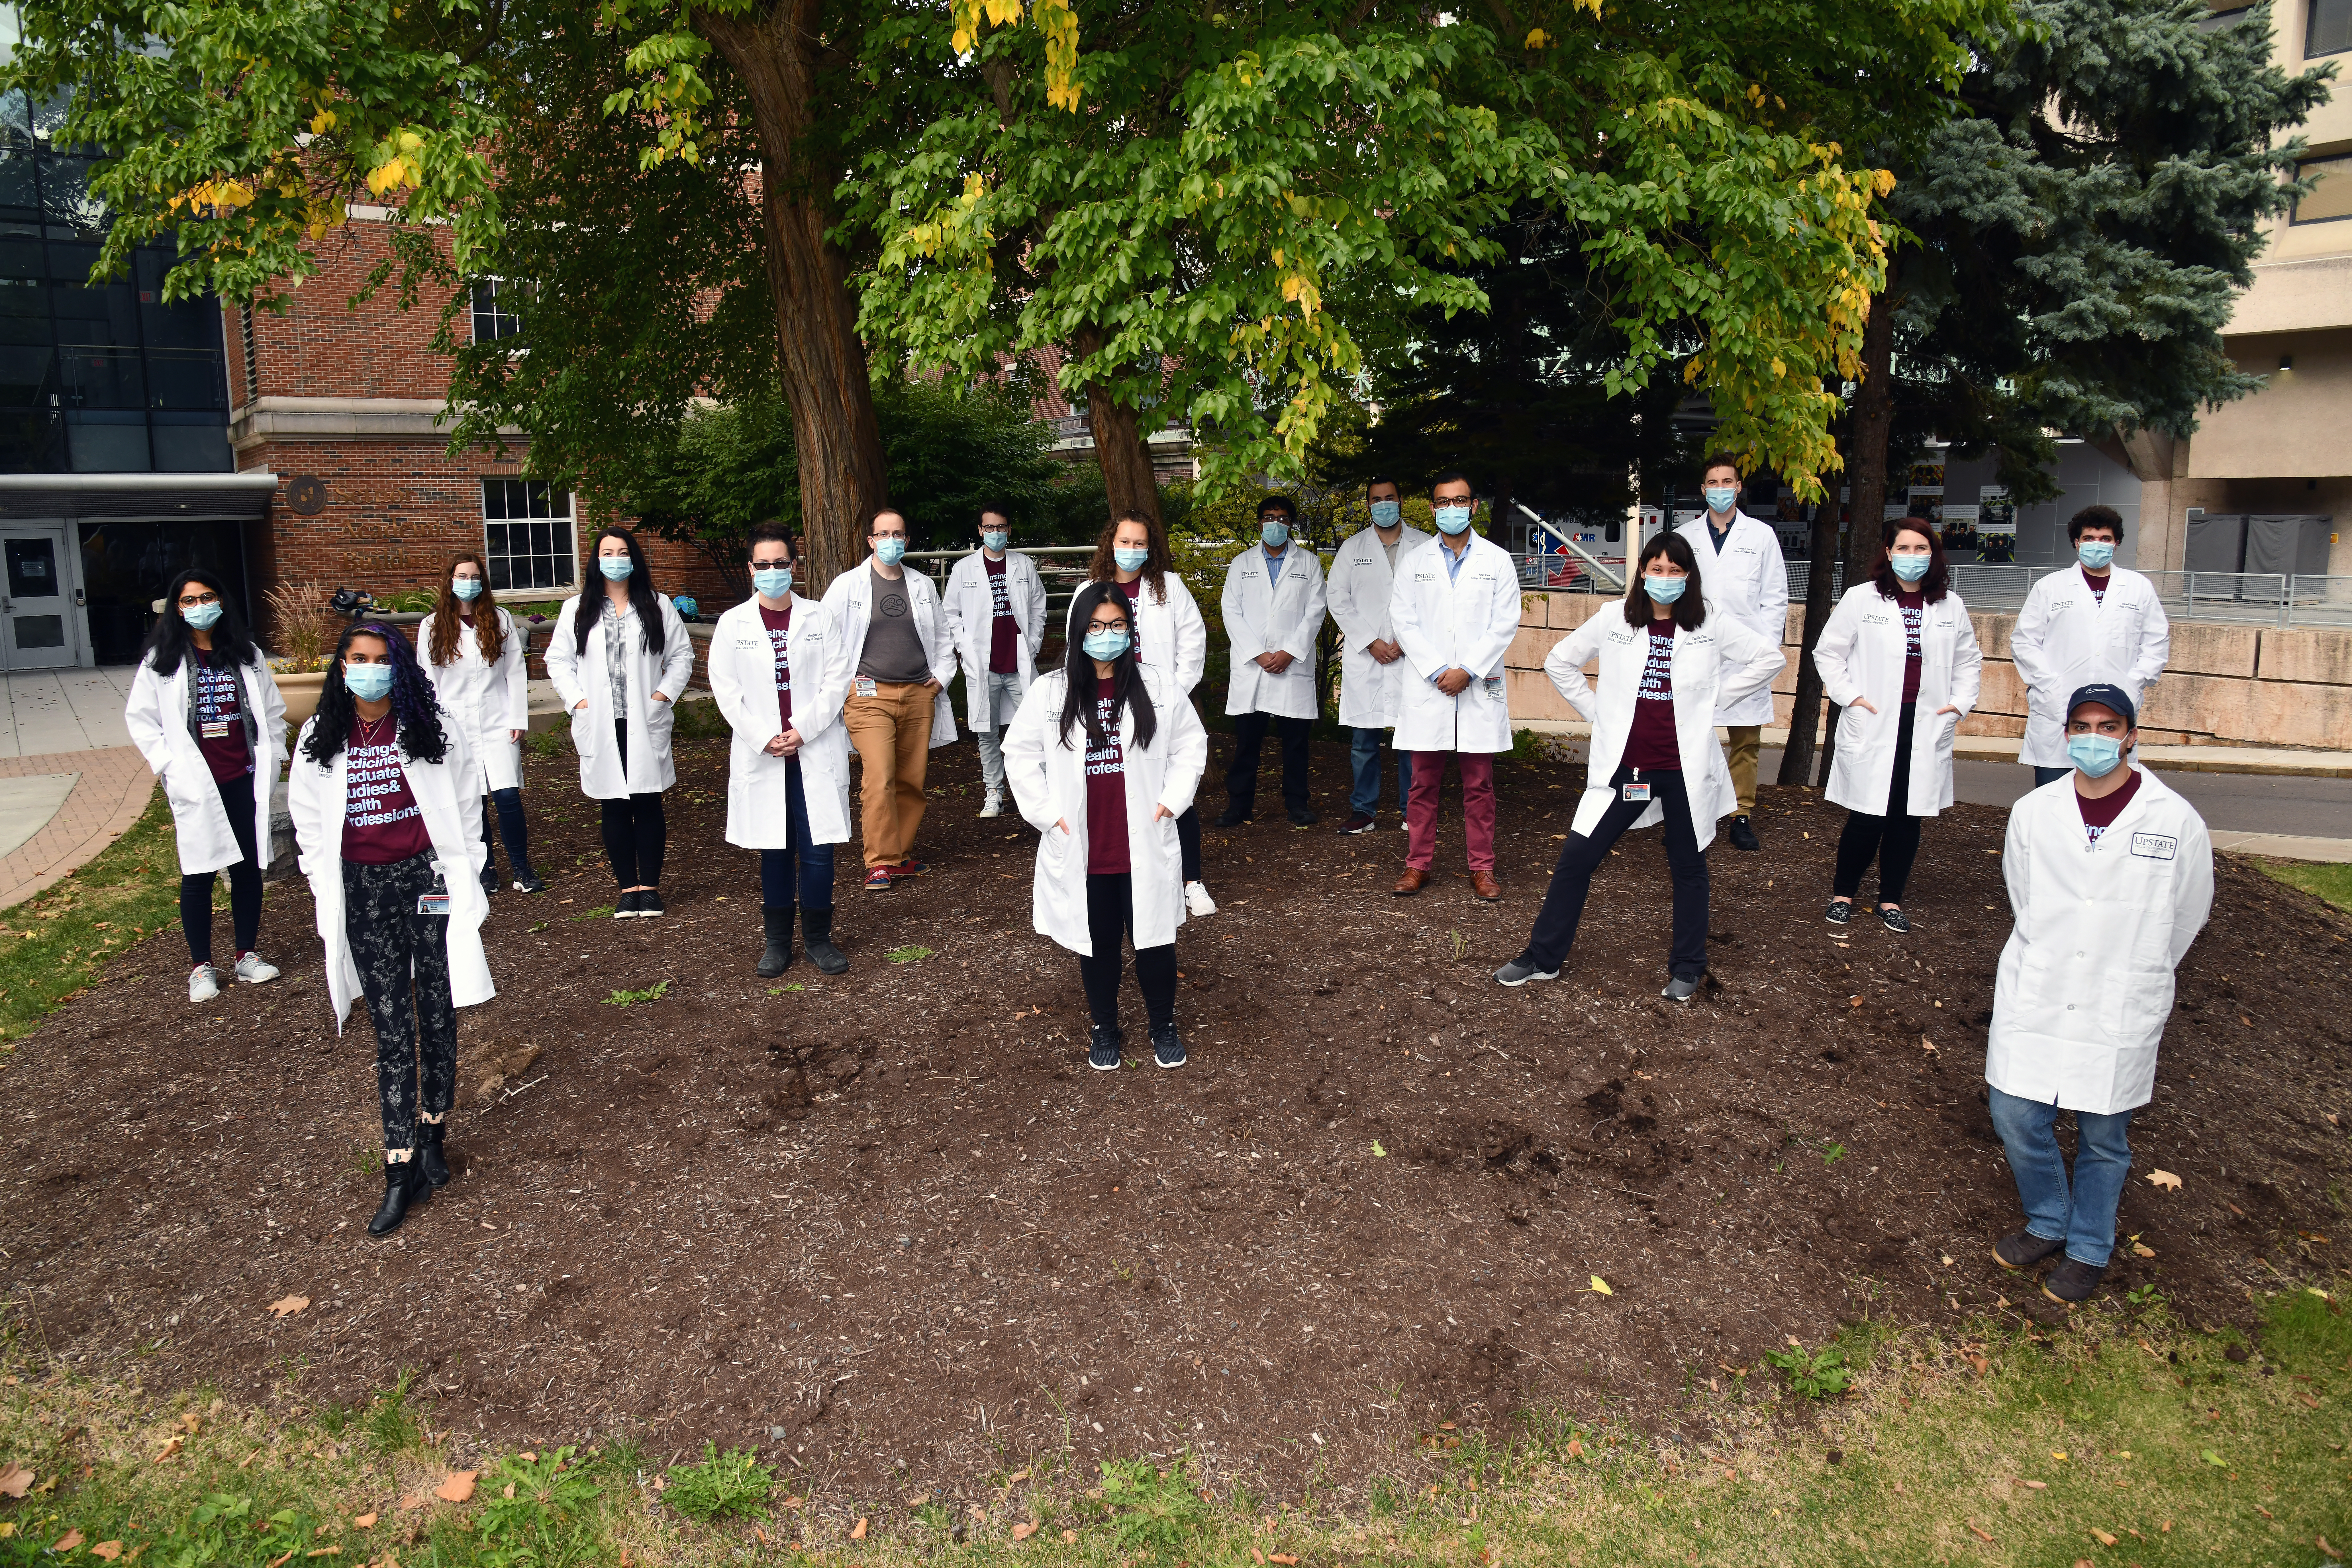 Dr. Mark Schmitt, Dean of the College of Graduate Studies, presented our first year graduate students with their customized, white lab coats at the annual Biomedical Sciences Retreat.